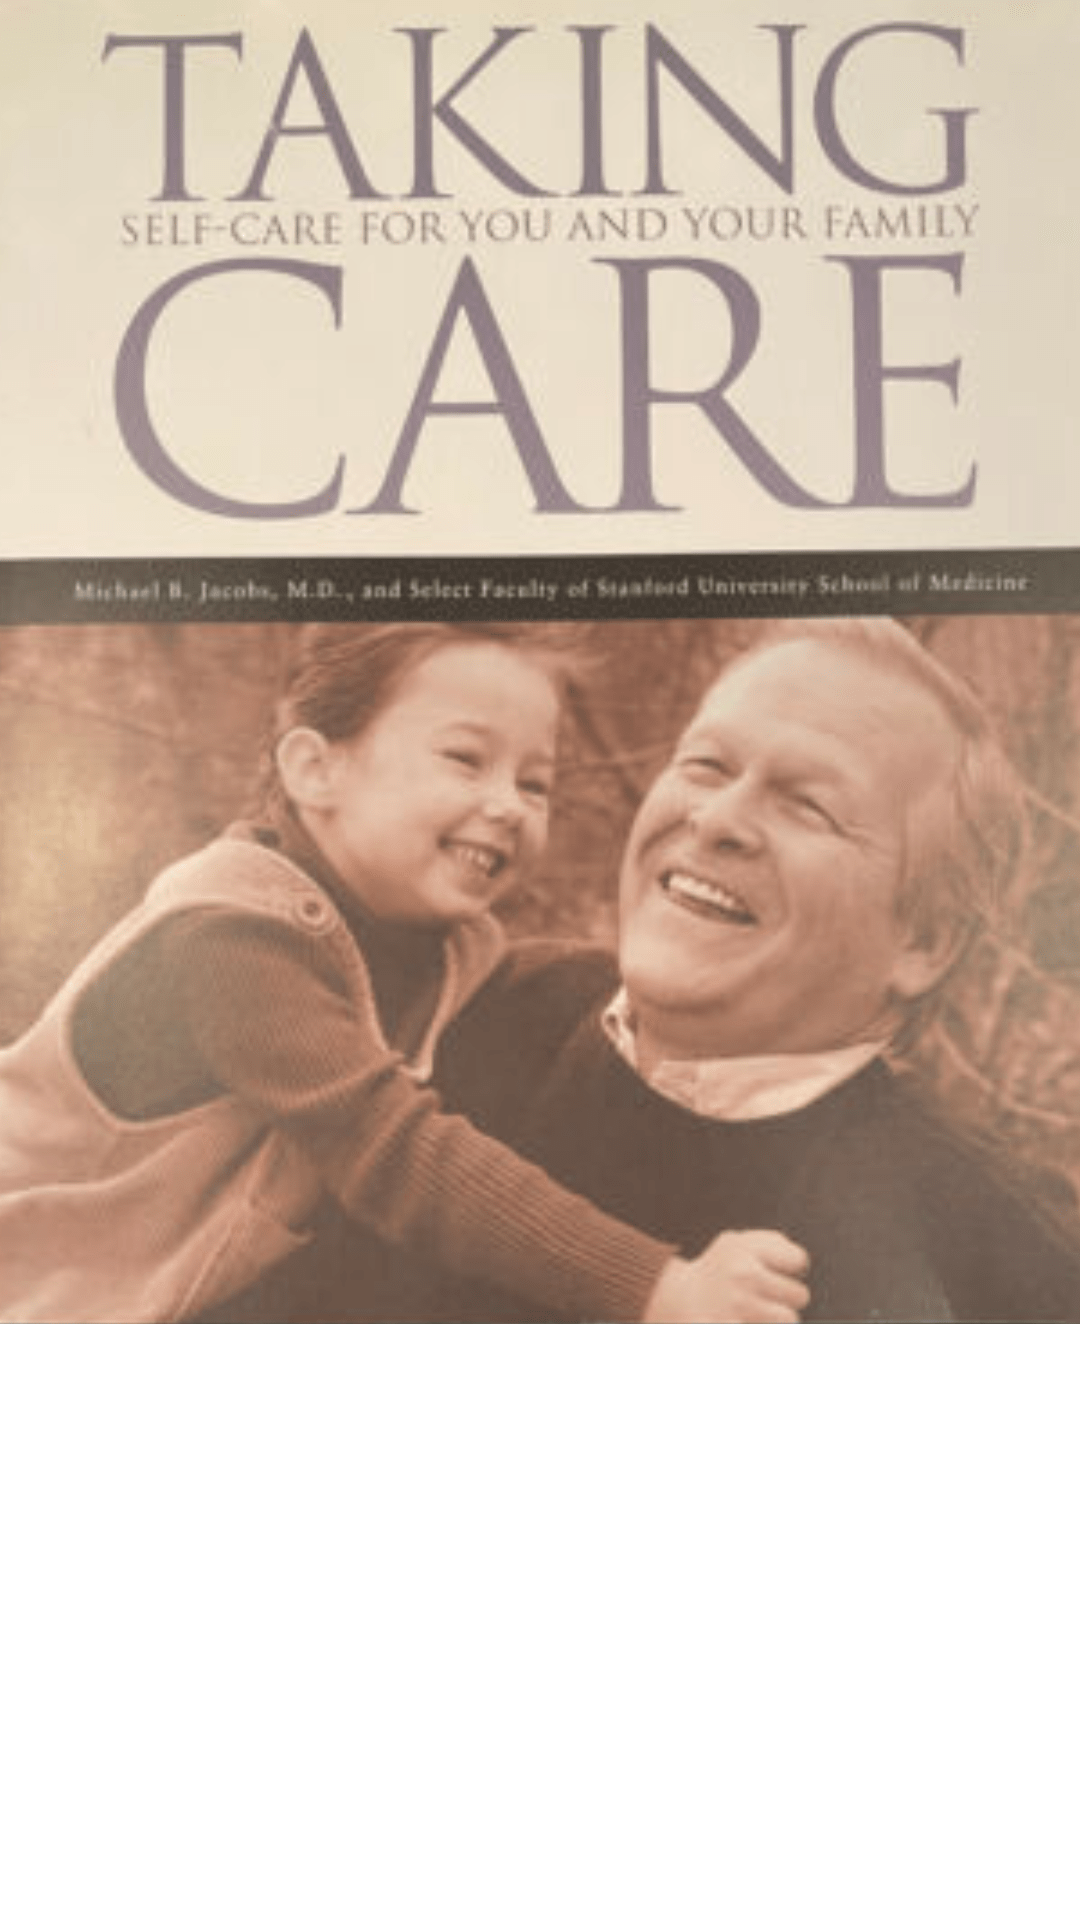 Taking Care: Self-Care for You and Your Family